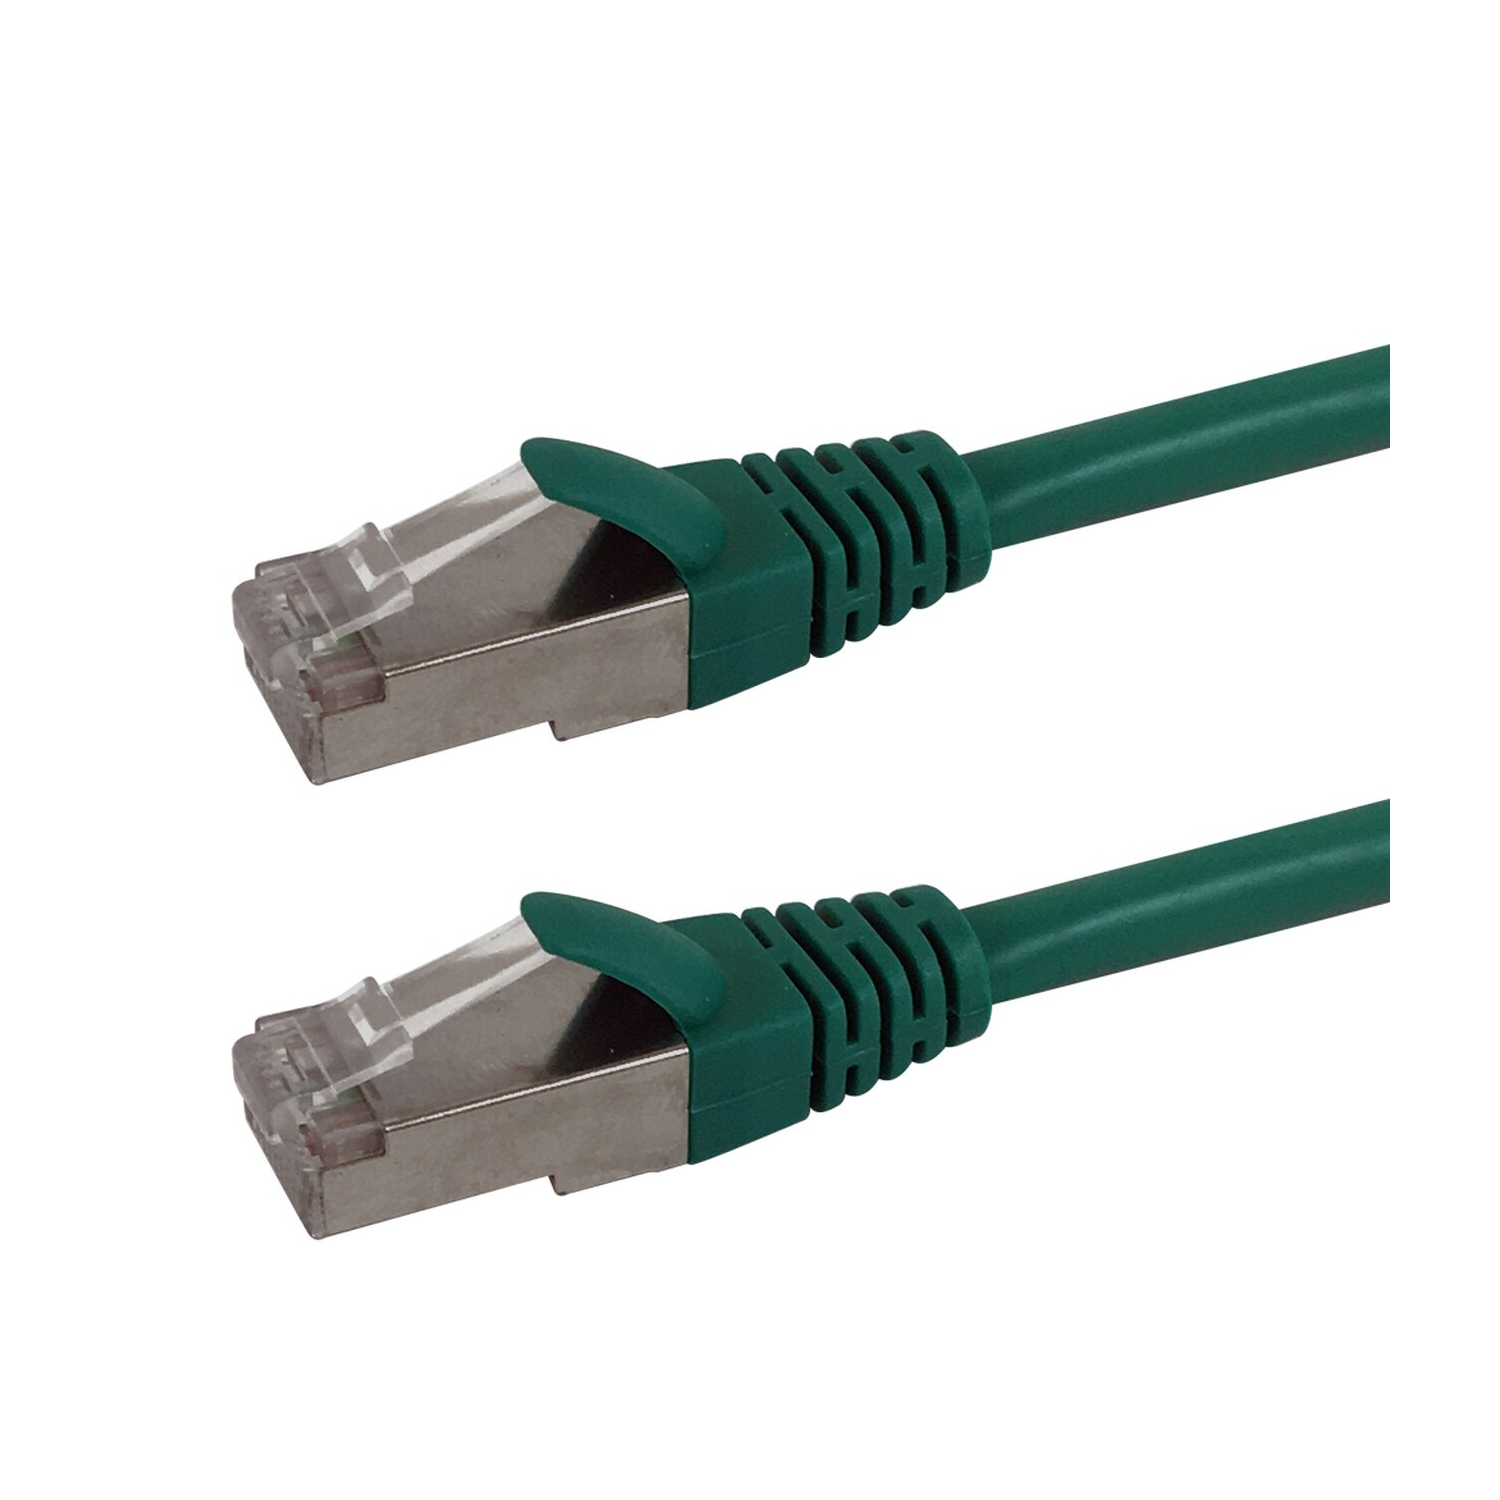 HYFAY Ethernet CAT6 Patch Cable 2 FT STP Stranded Shielded 26AWG Molded Networking/Internet Cable, 550MHZ CMR, Green